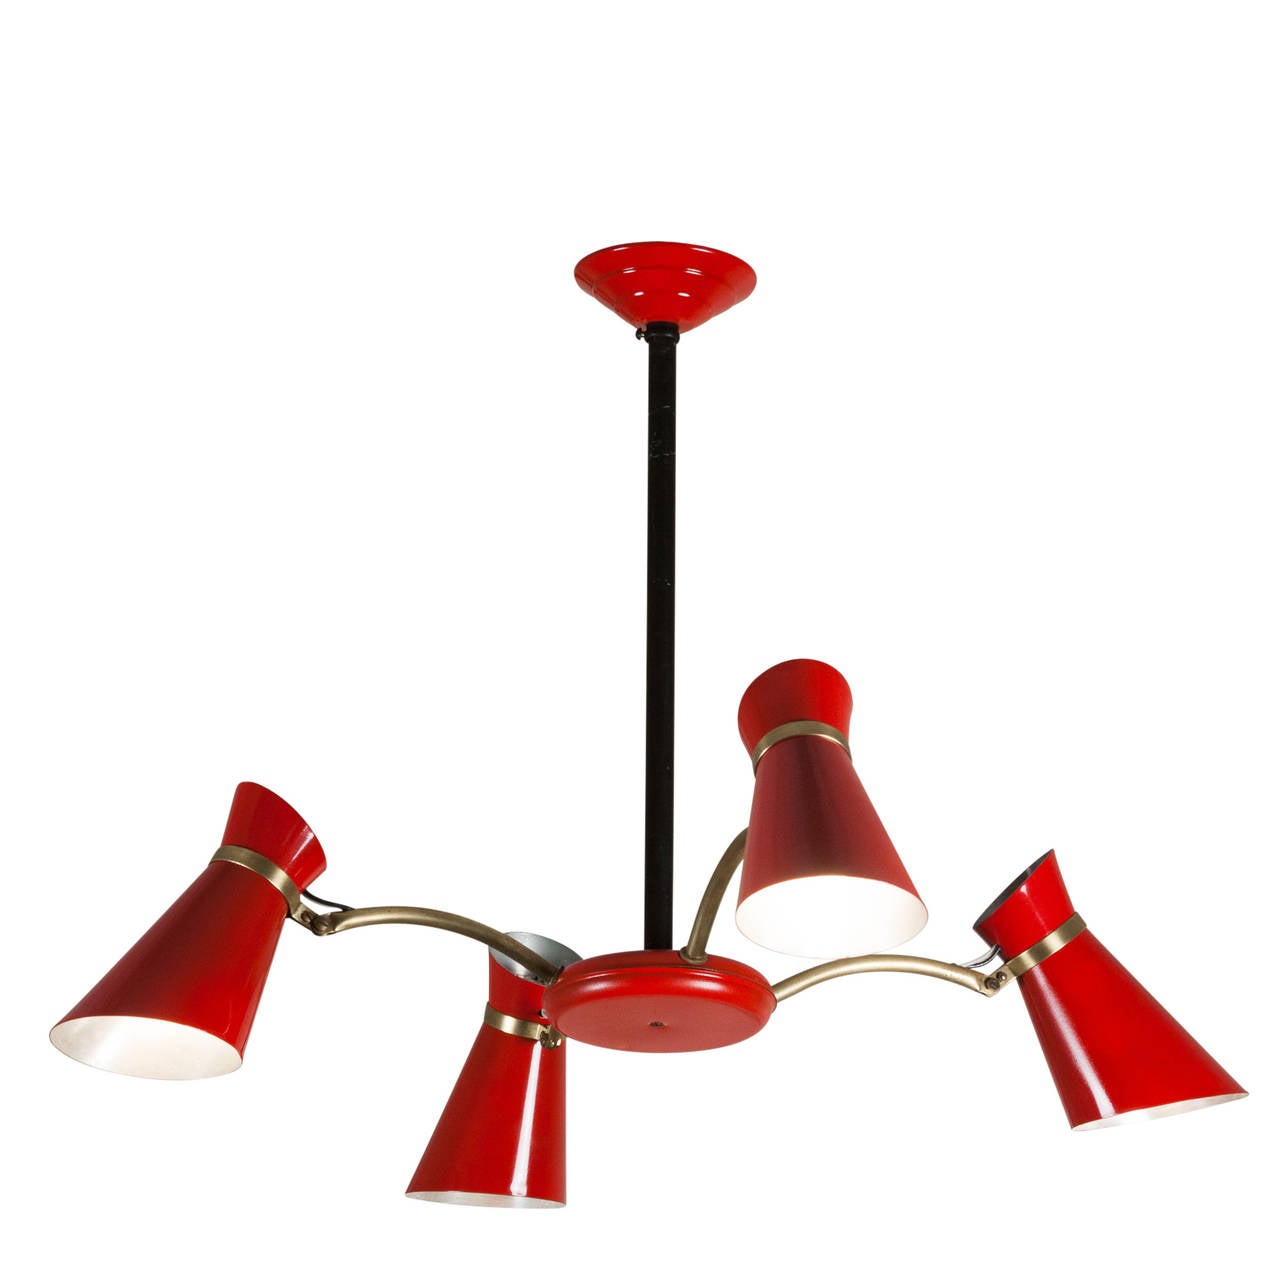 Lacquered metal and brass four-light chandeliers, the shades and central disc in bright red, each shade with three bands of perforations, and each shade adjustable with a hinge joint. French, 1950s. Diameter 26 in, overall height 20 in, diameter of